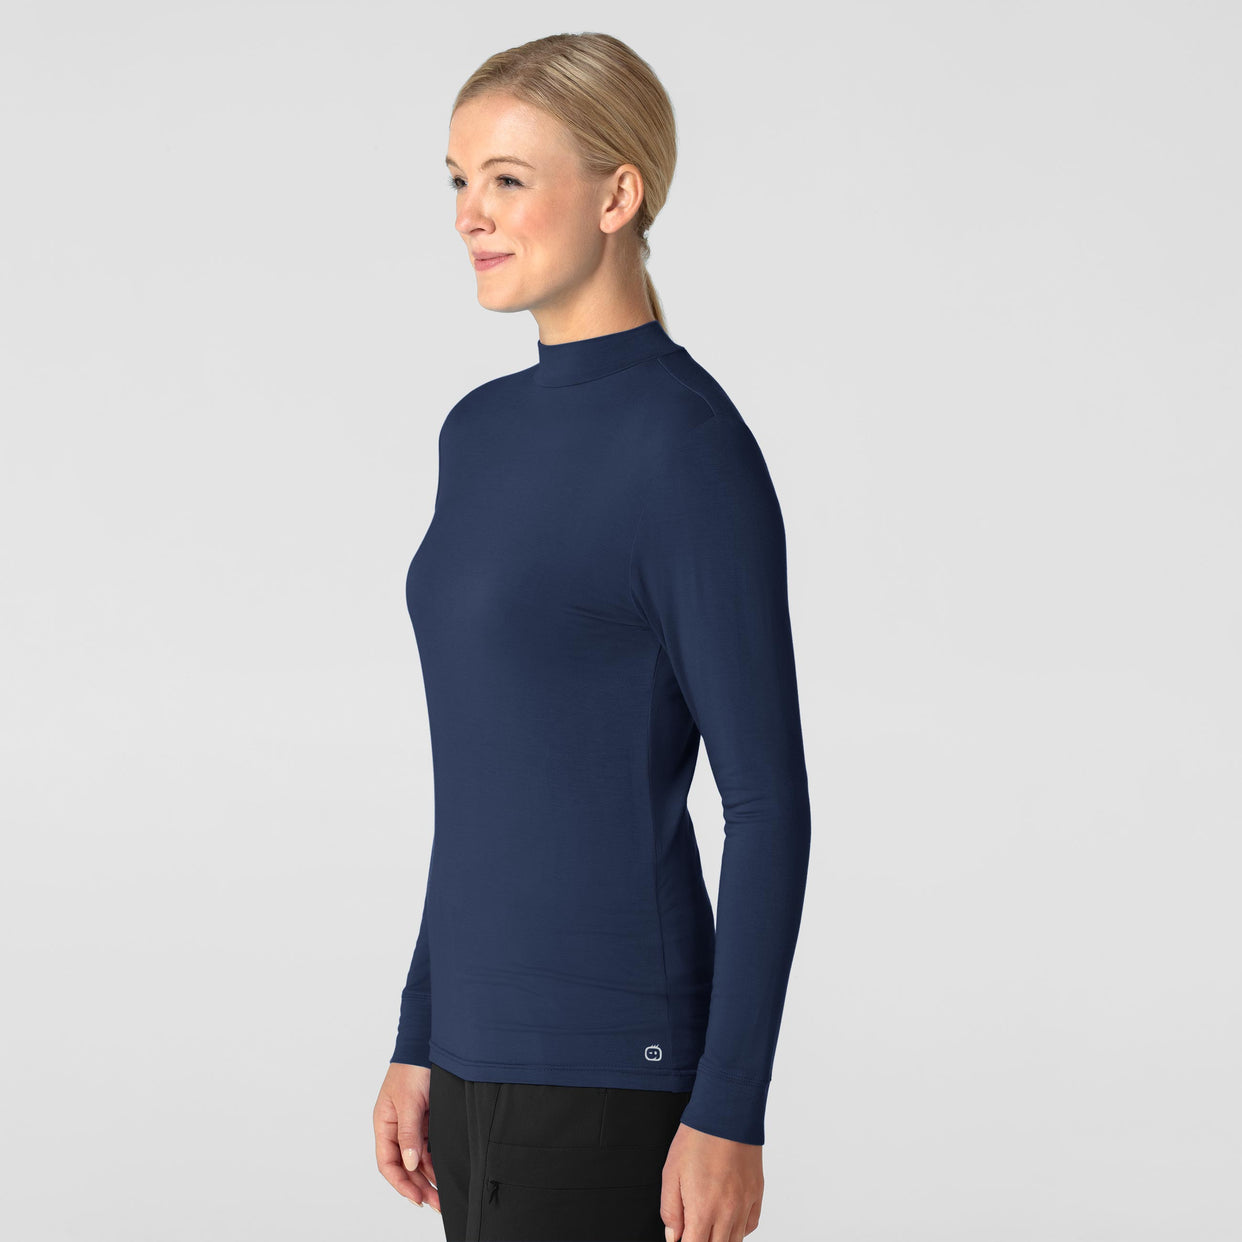 Knits and Layers Women’s Long Sleeve Mock Neck Silky Tee Navy side view